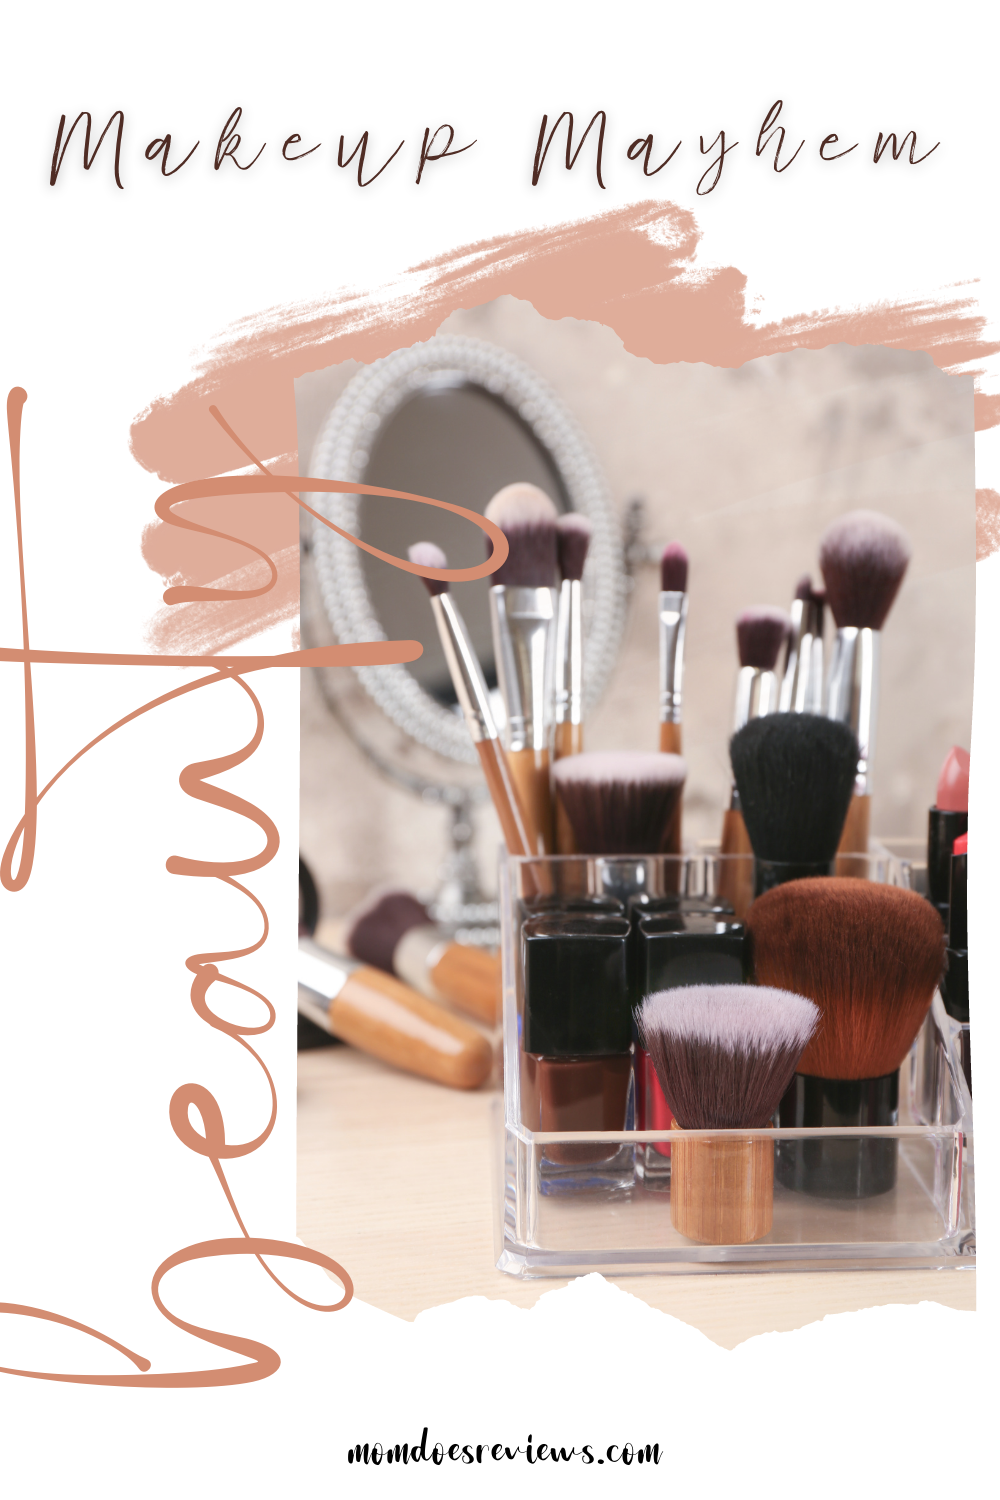 Makeup Mayhem- how to organize all those beauty products